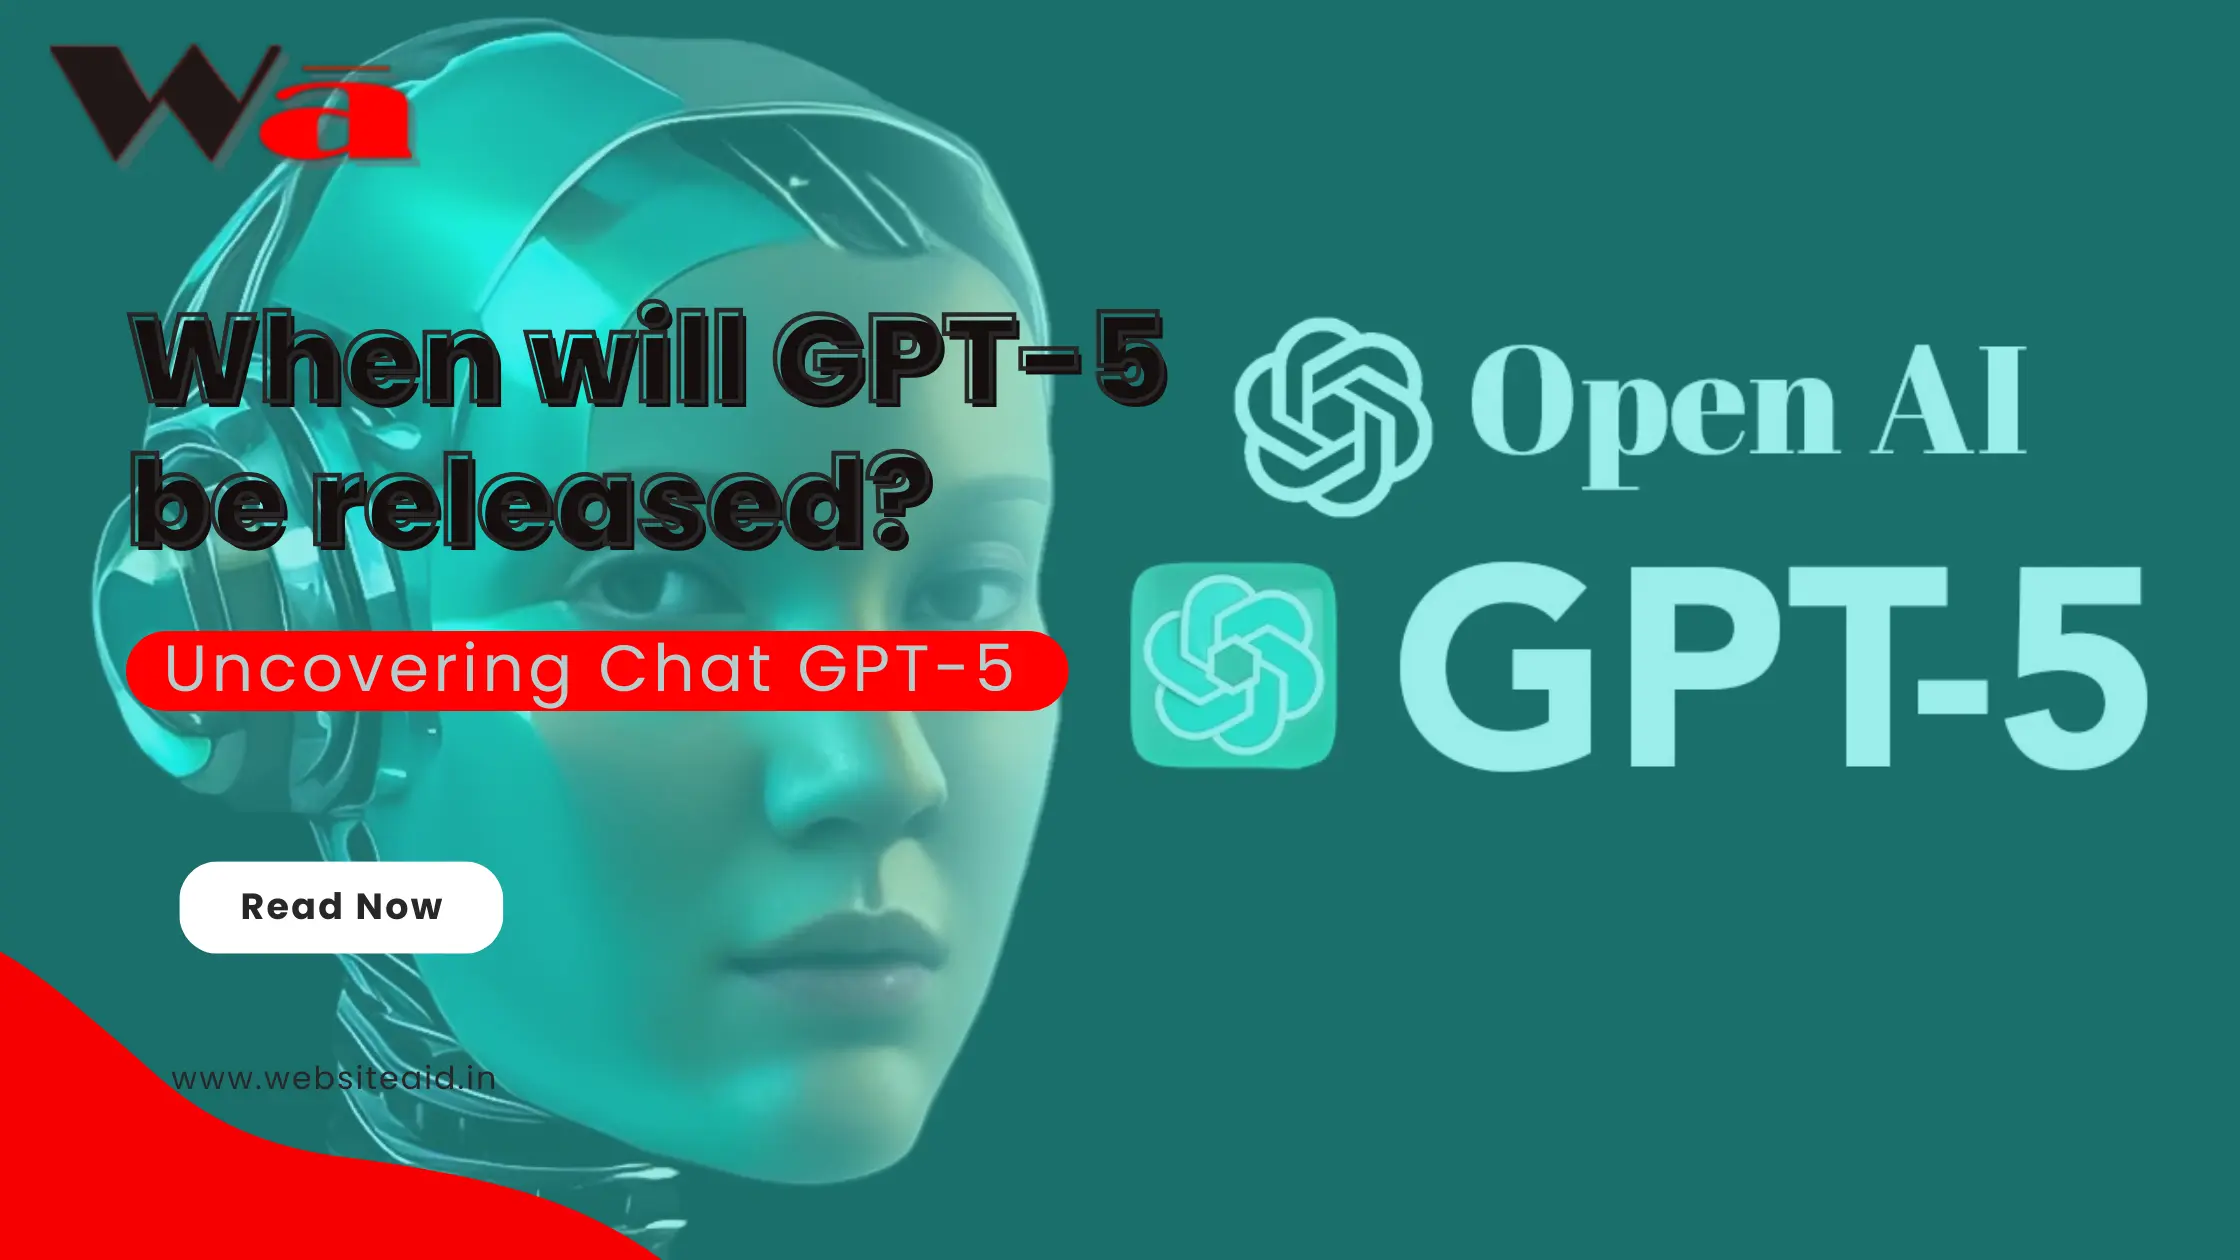 When will GPT-5 be released? Uncovering Chat GPT-5